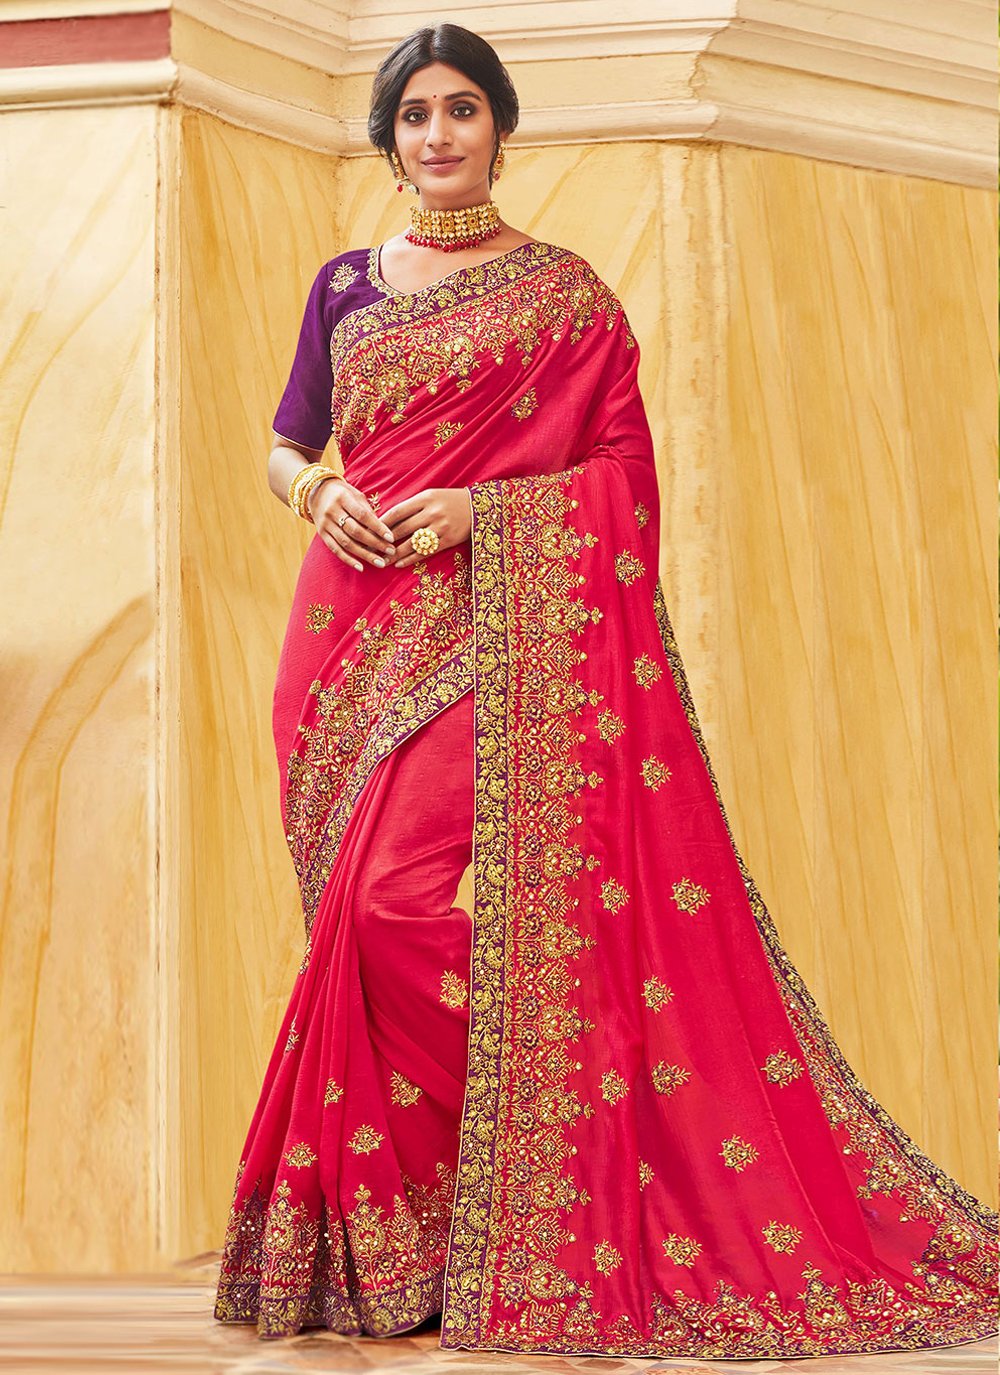 Engagement Sarees Collection - 10 Trending Designs For Brides